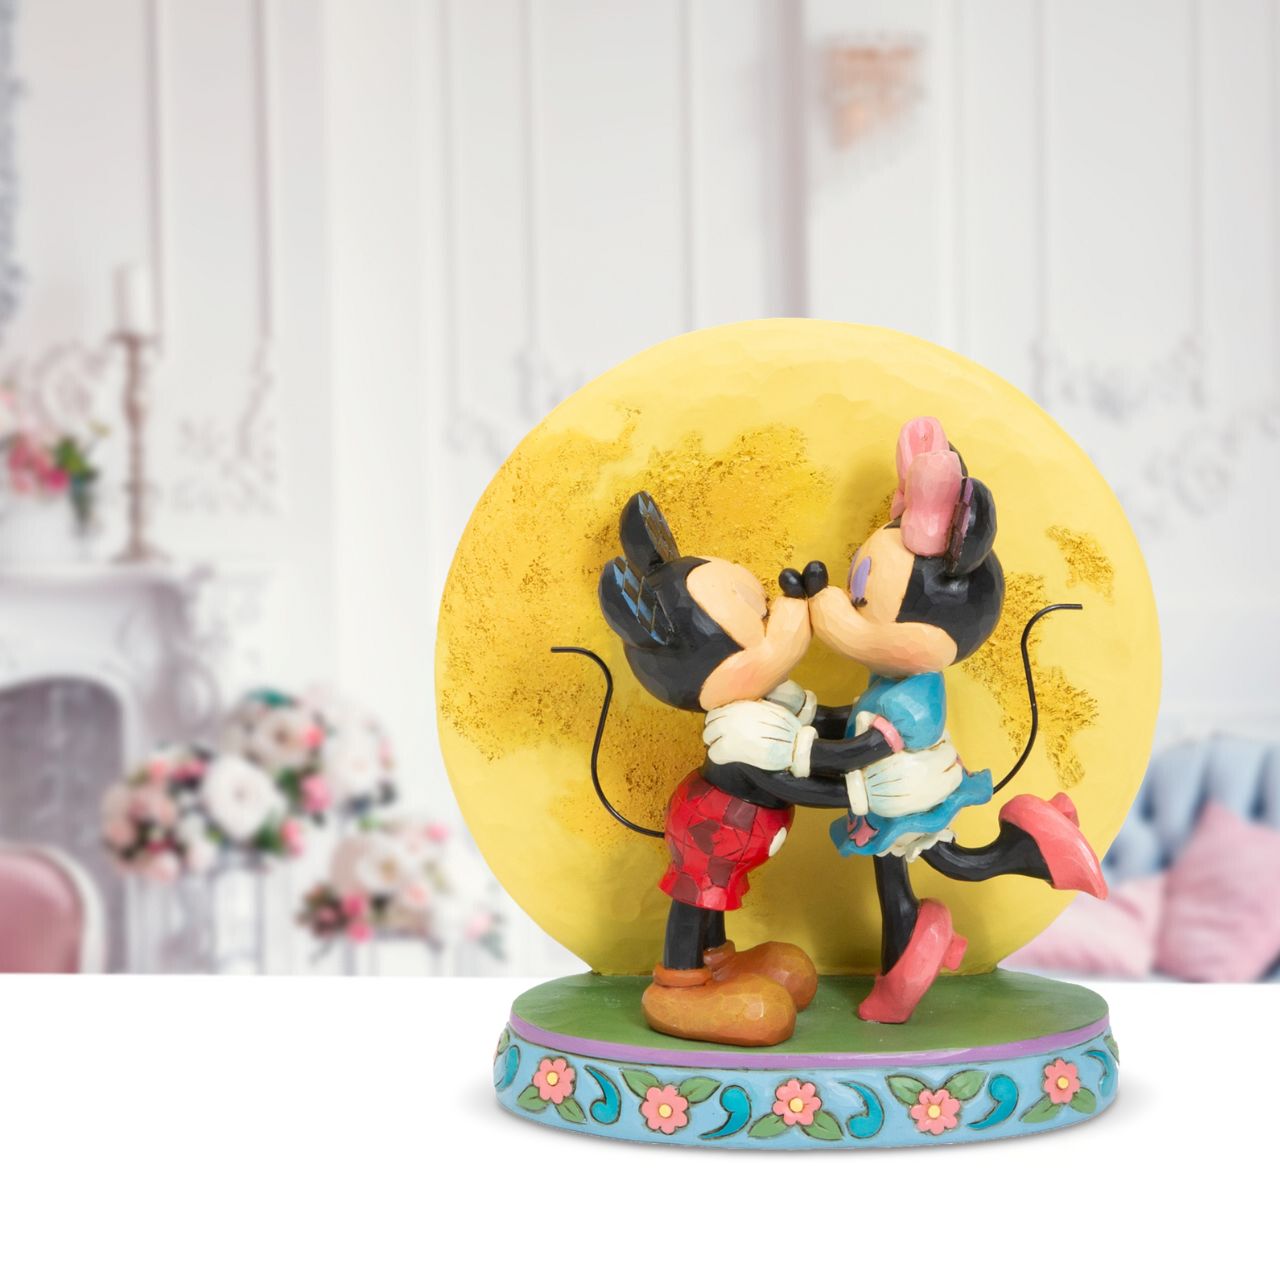 Disney Traditions Magic and Moonlight Mickey and Minnie with Moon Figurine  This delightful figurine portrays Mickey & his sweetheart Minnie dancing in the moonlight. This refreshing piece celebrates springtime romance and is sure to be a hit with collectors.